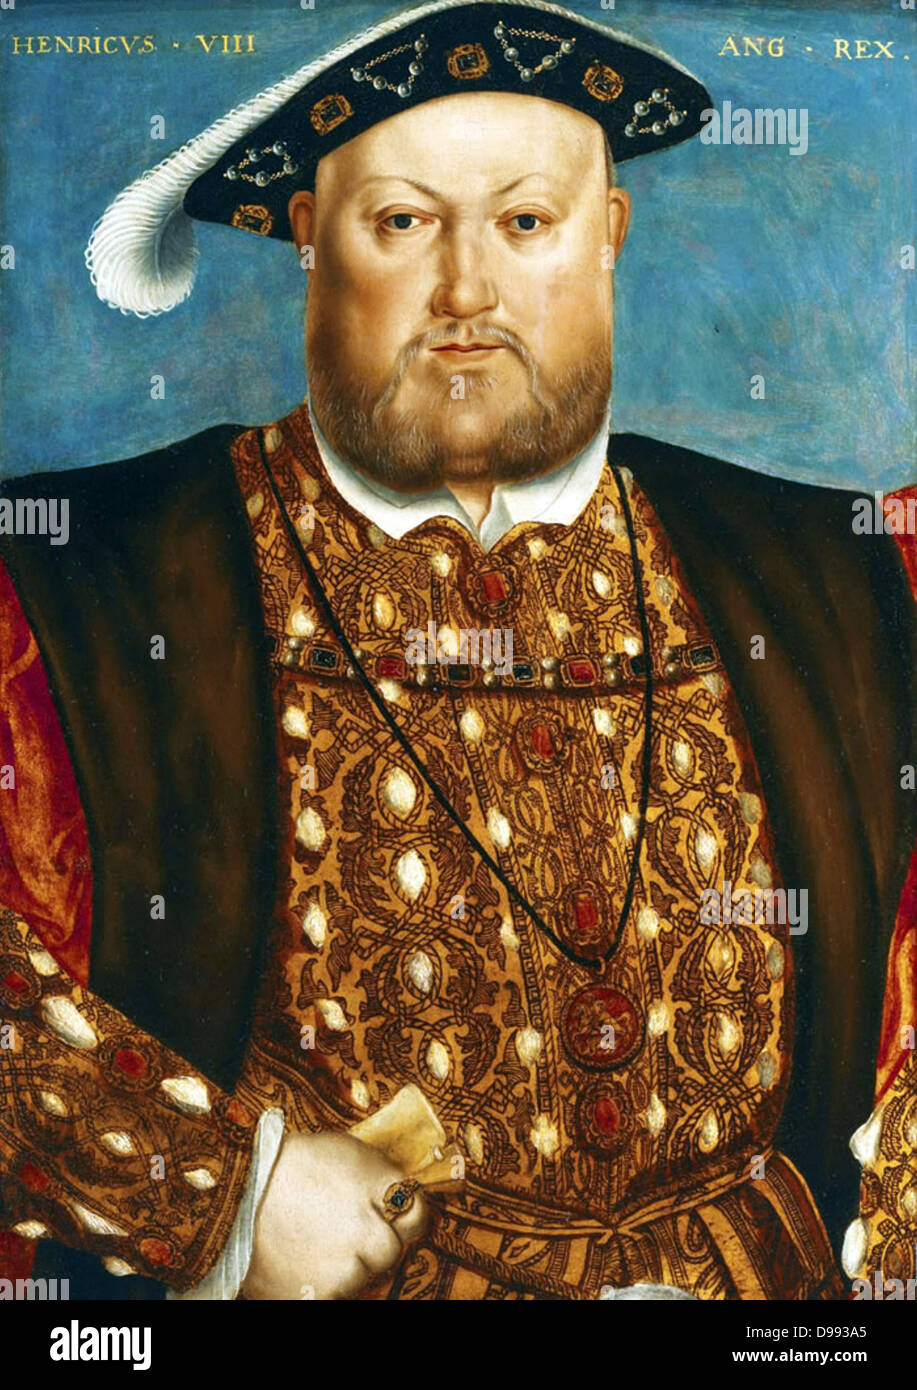 Portrait of Henry VIII. By Hans Holbein Date c. 1540. Henry VIII (28 June 1491 – 28 January 1547) was King of England from 21 April 1509 until his death. He was also Lord of Ireland (later King of Ireland) and claimant to the Kingdom of France. Henry was t Stock Photo